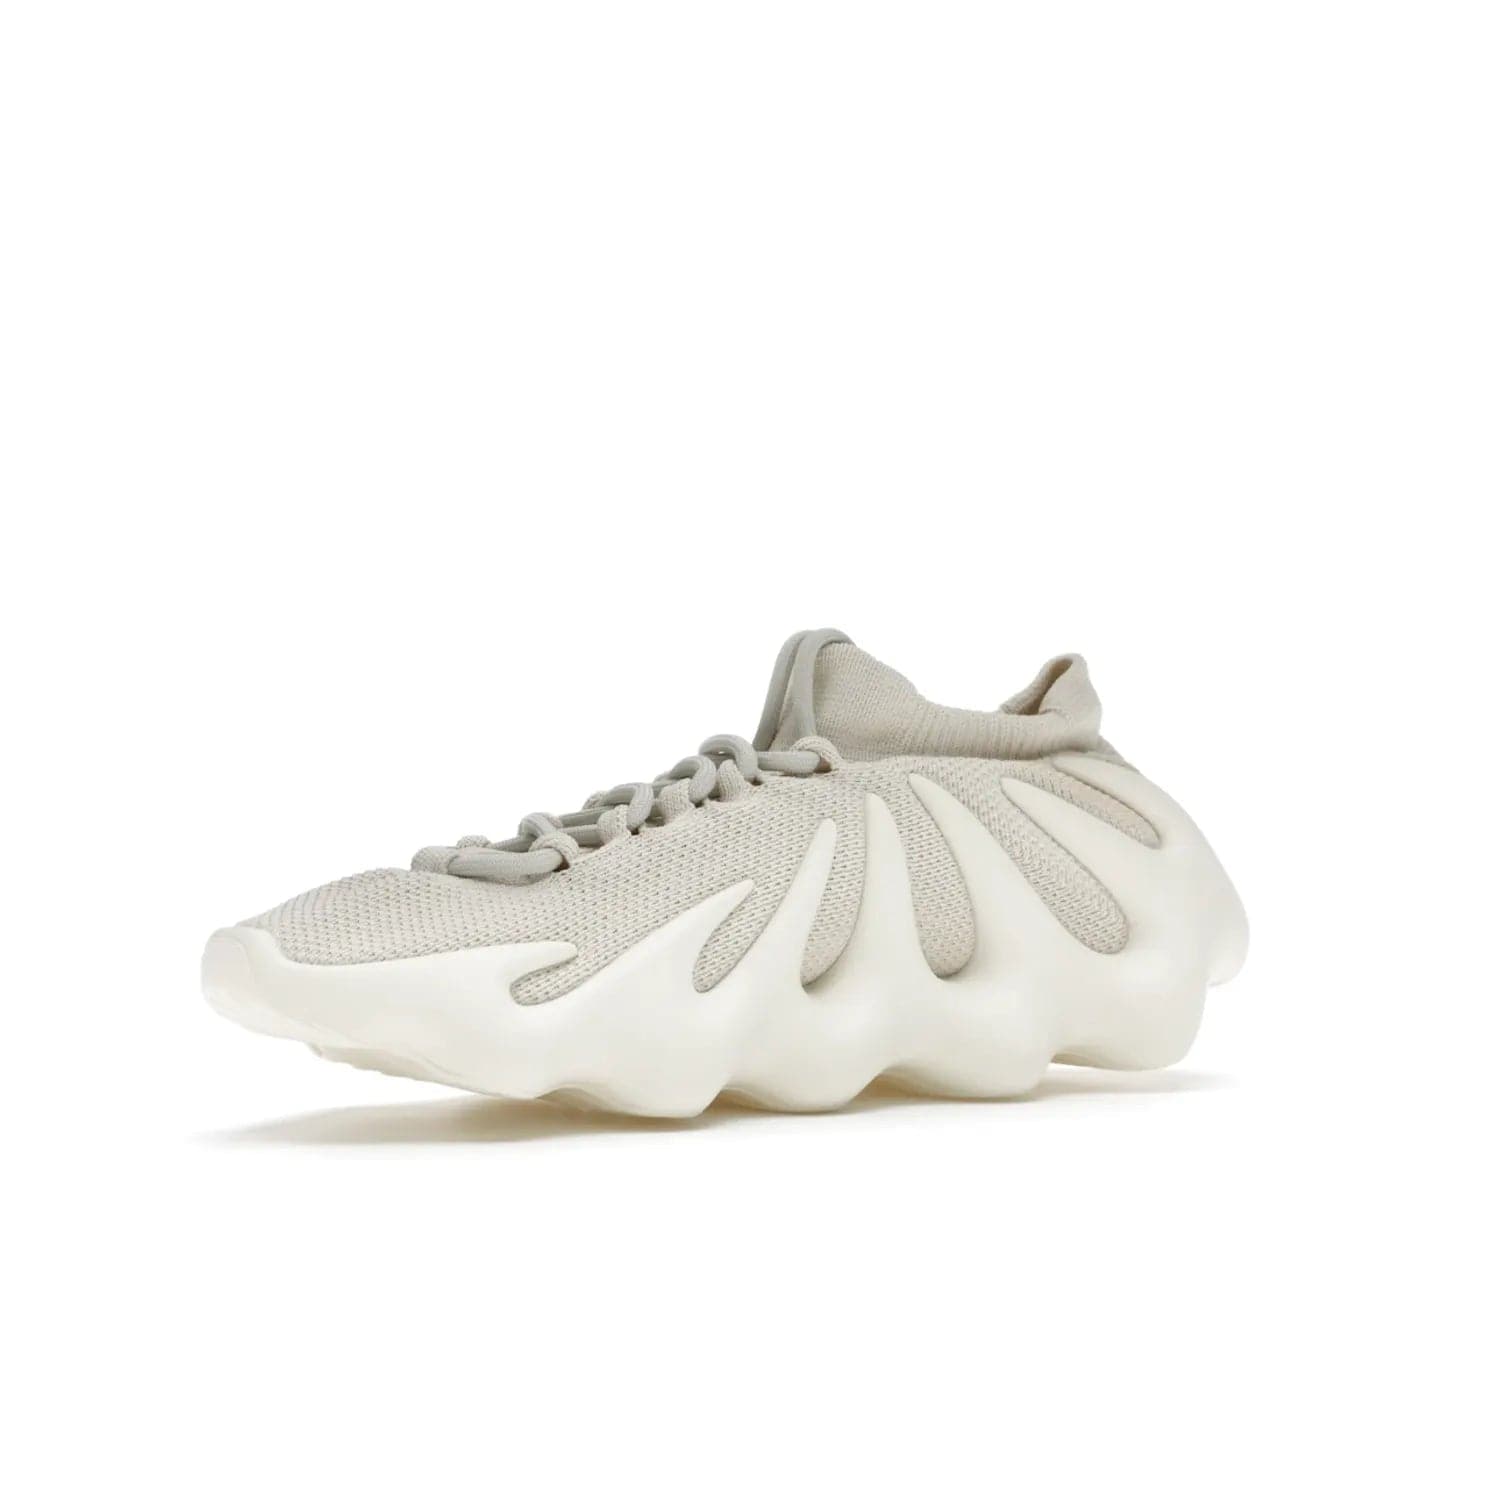 adidas Yeezy 450 Cloud White - Image 16 - Only at www.BallersClubKickz.com - Experience the future with the adidas Yeezy 450 Cloud White. A two-piece design featuring an extreme foam sole and mesh upper, this silhouette is expected to release in March 2021. Get your hands on this striking Cloud White/Cloud White colorway and stand out in the crowd.